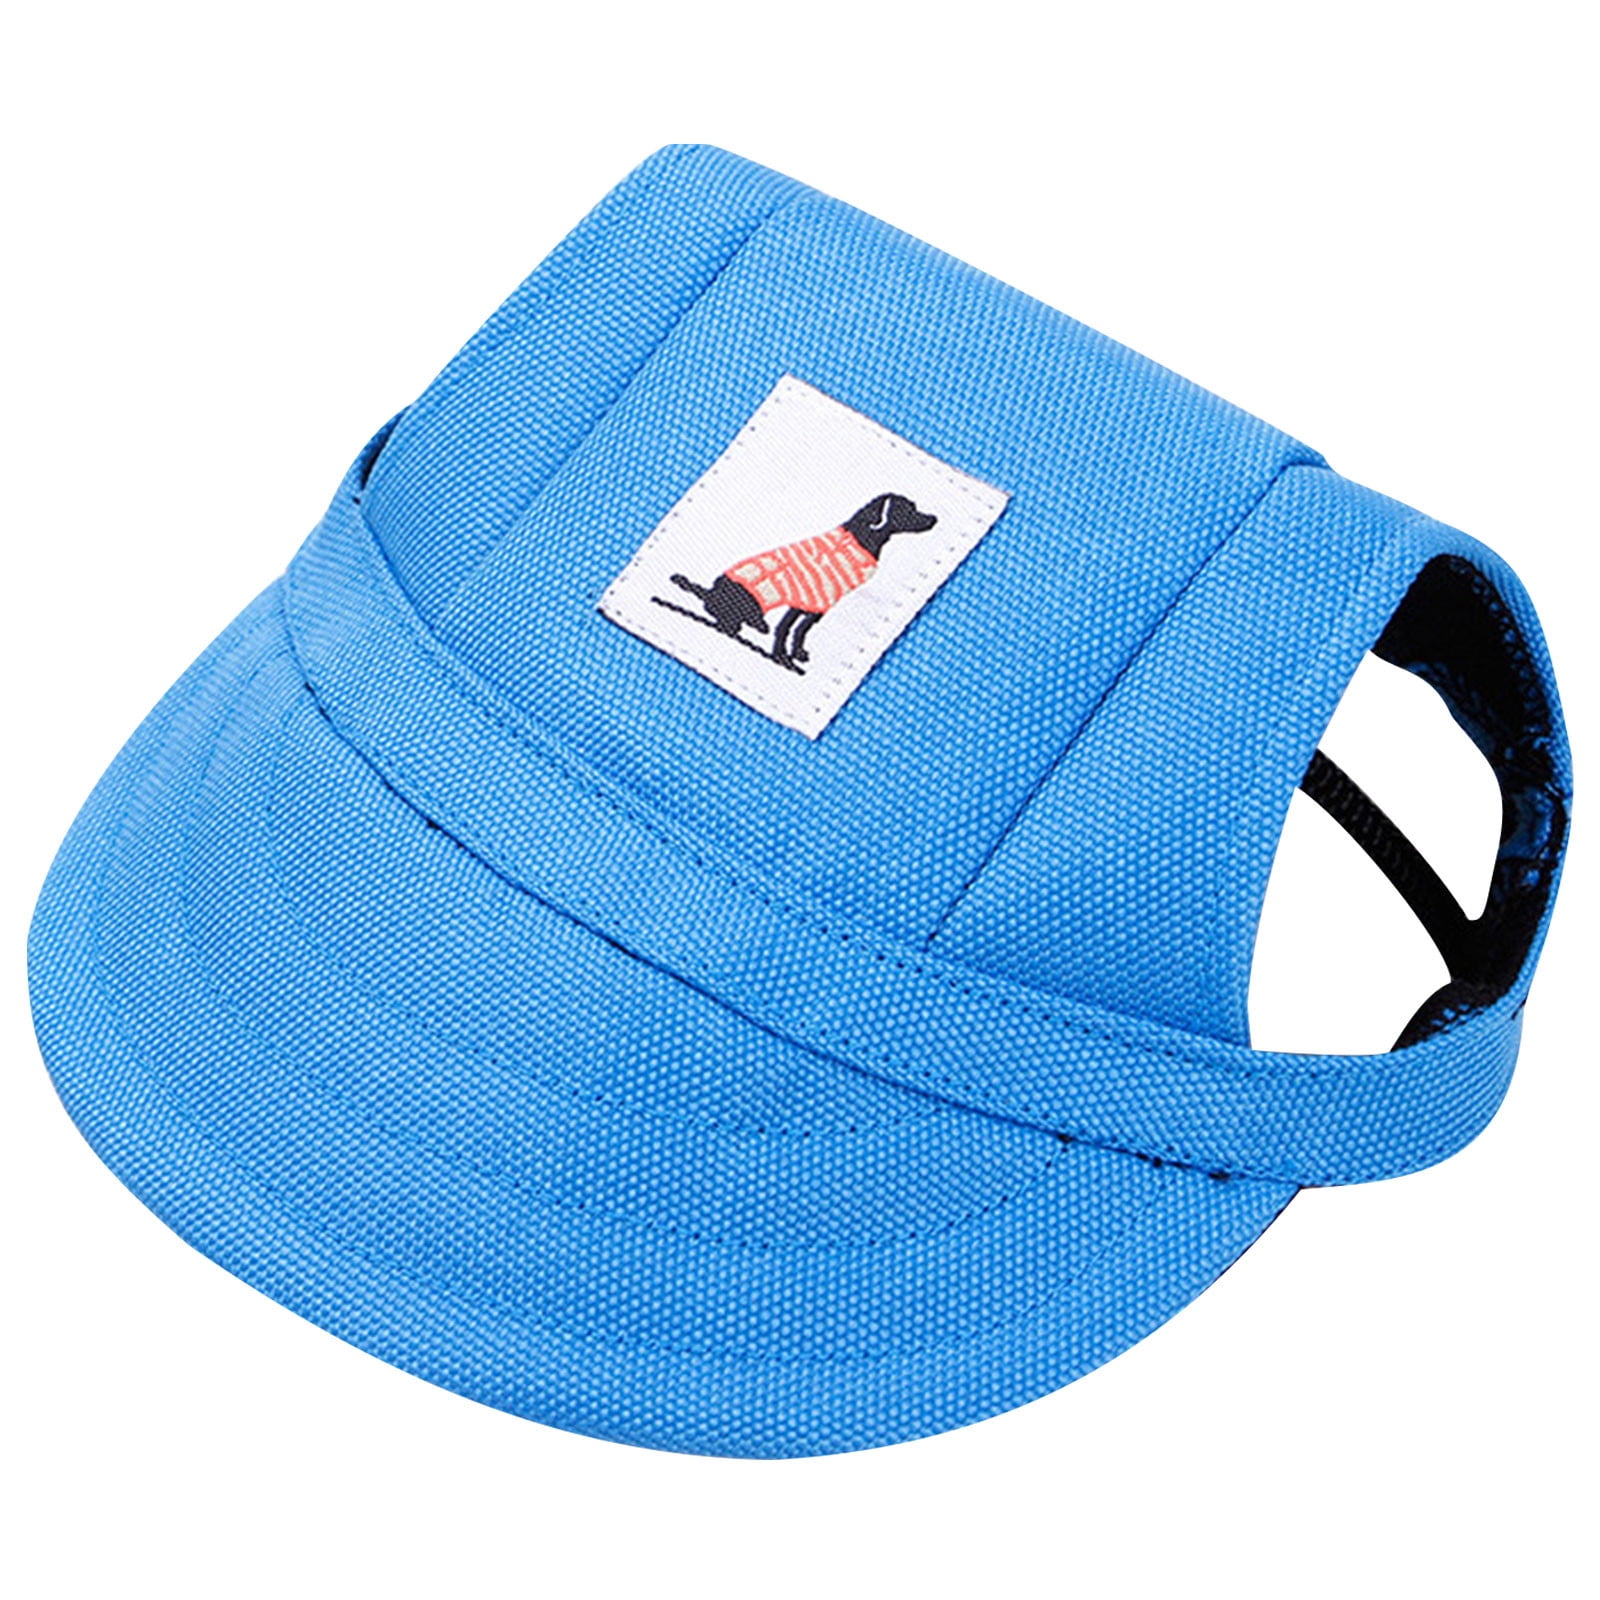 S 22-41cm Pet Summer Cap Cute Outdoor Adjustable Baseball Hat Small Dog Designed Hole for Pets Ears